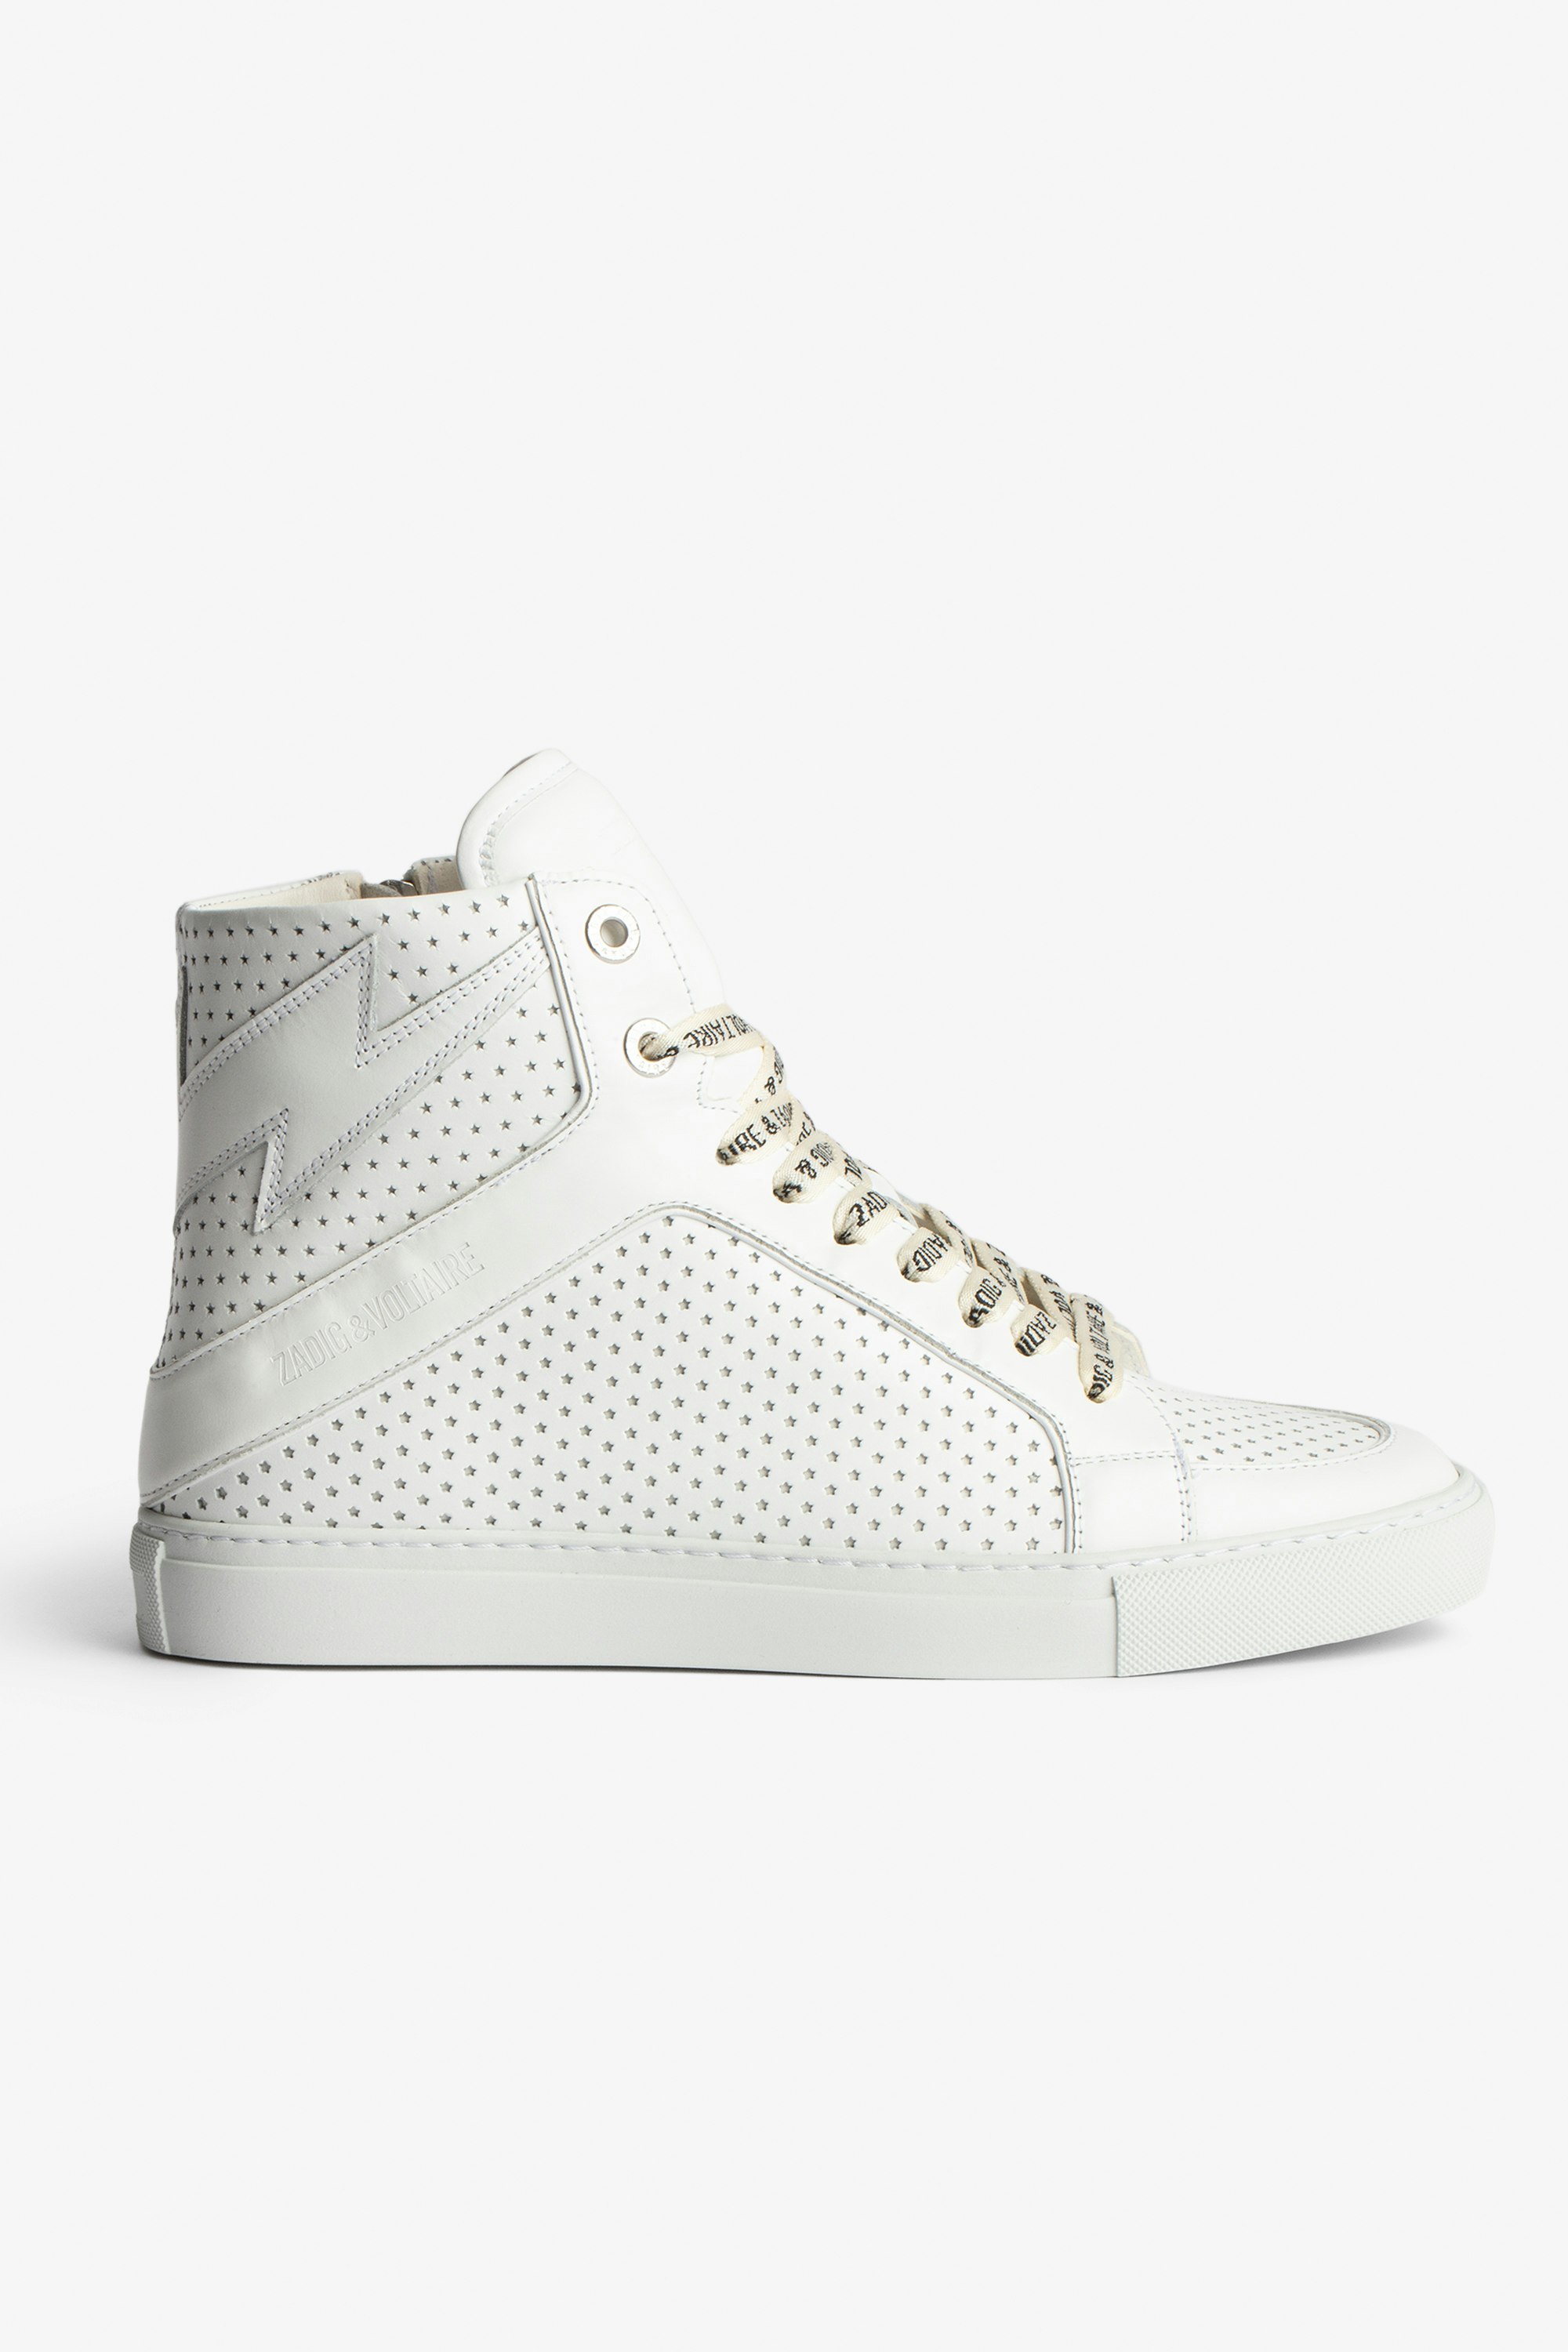 ZV1747 High Flash High-Top Trainers - Women's high-top trainers in smooth white leather with perforated stars.